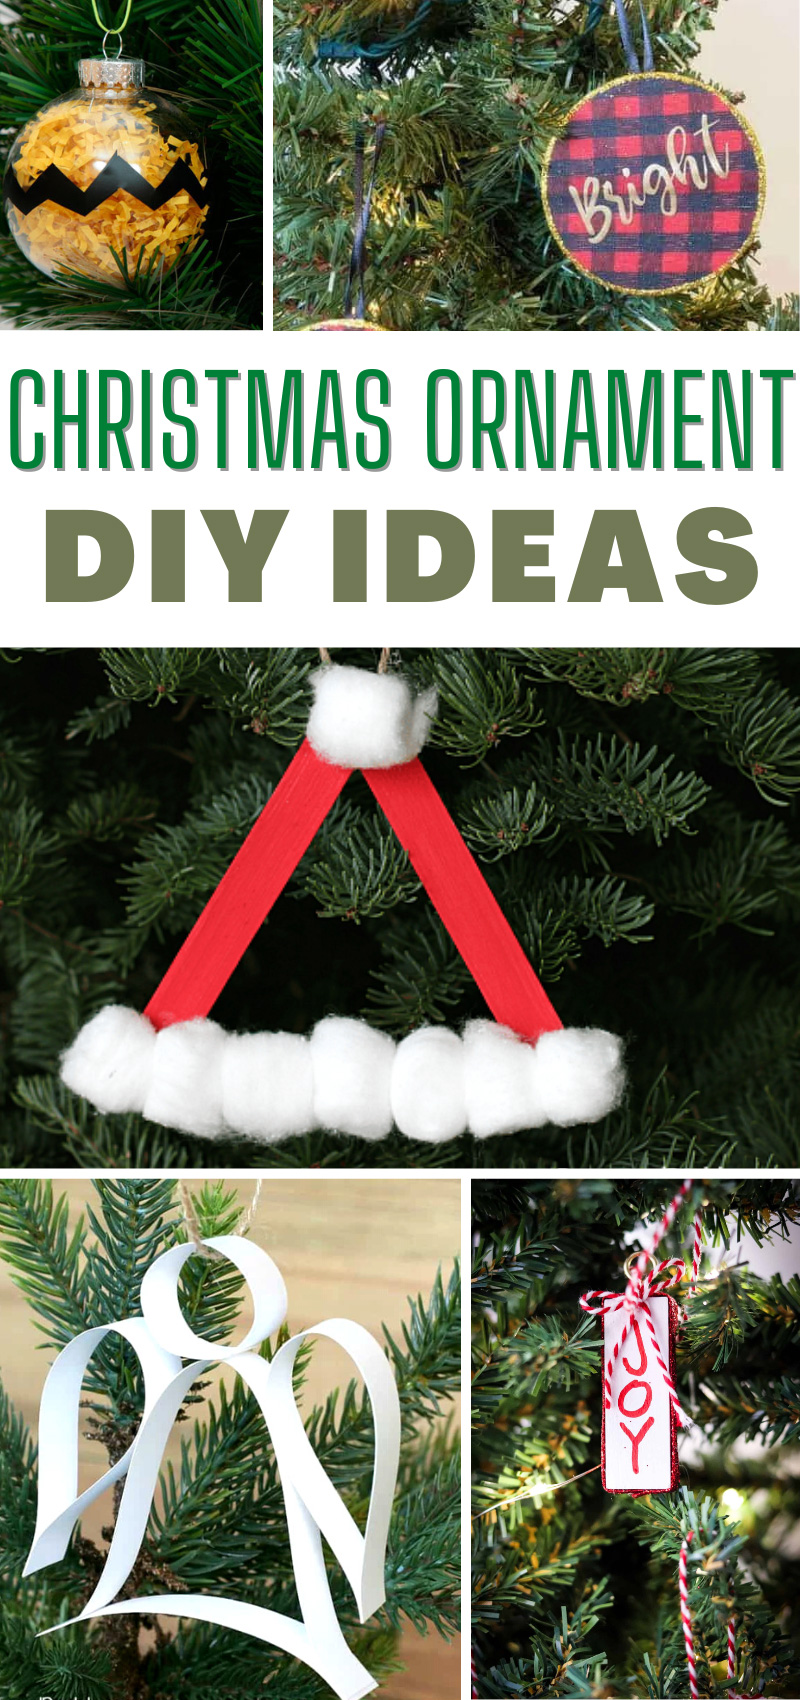 Popsicle Stick Christmas Ornaments - The Soccer Mom Blog